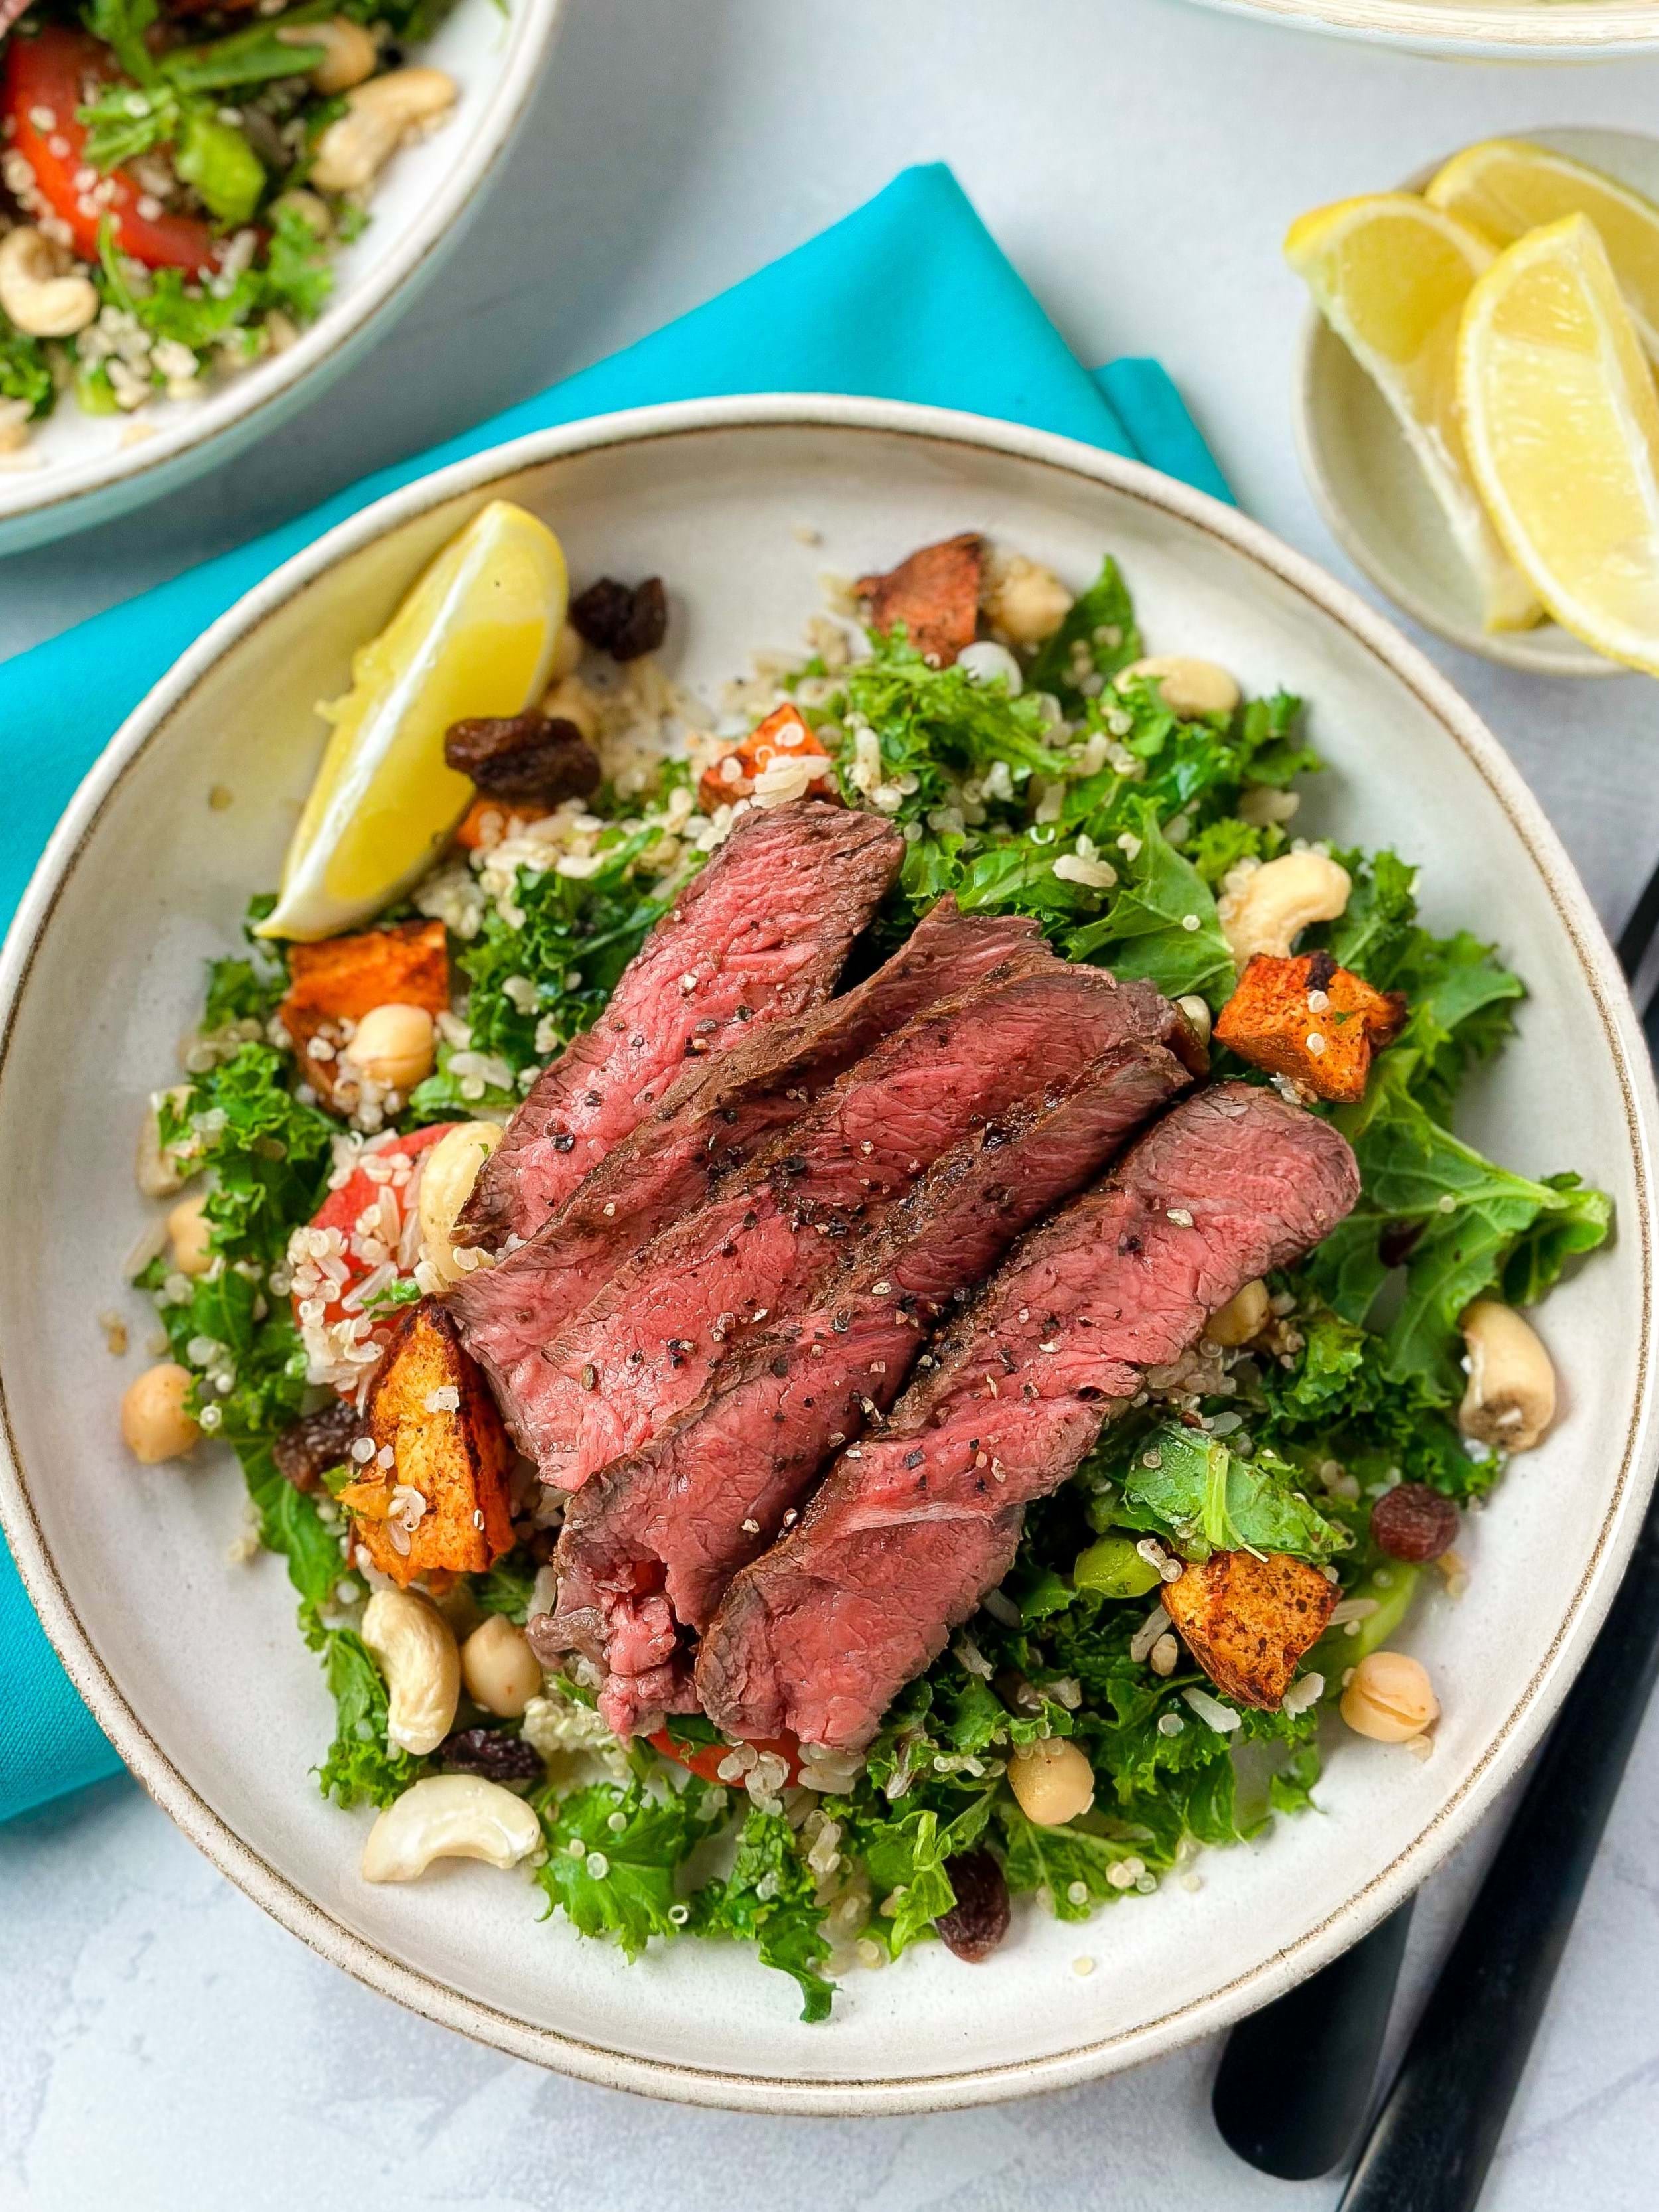 Moroccan Style Steak And Salad